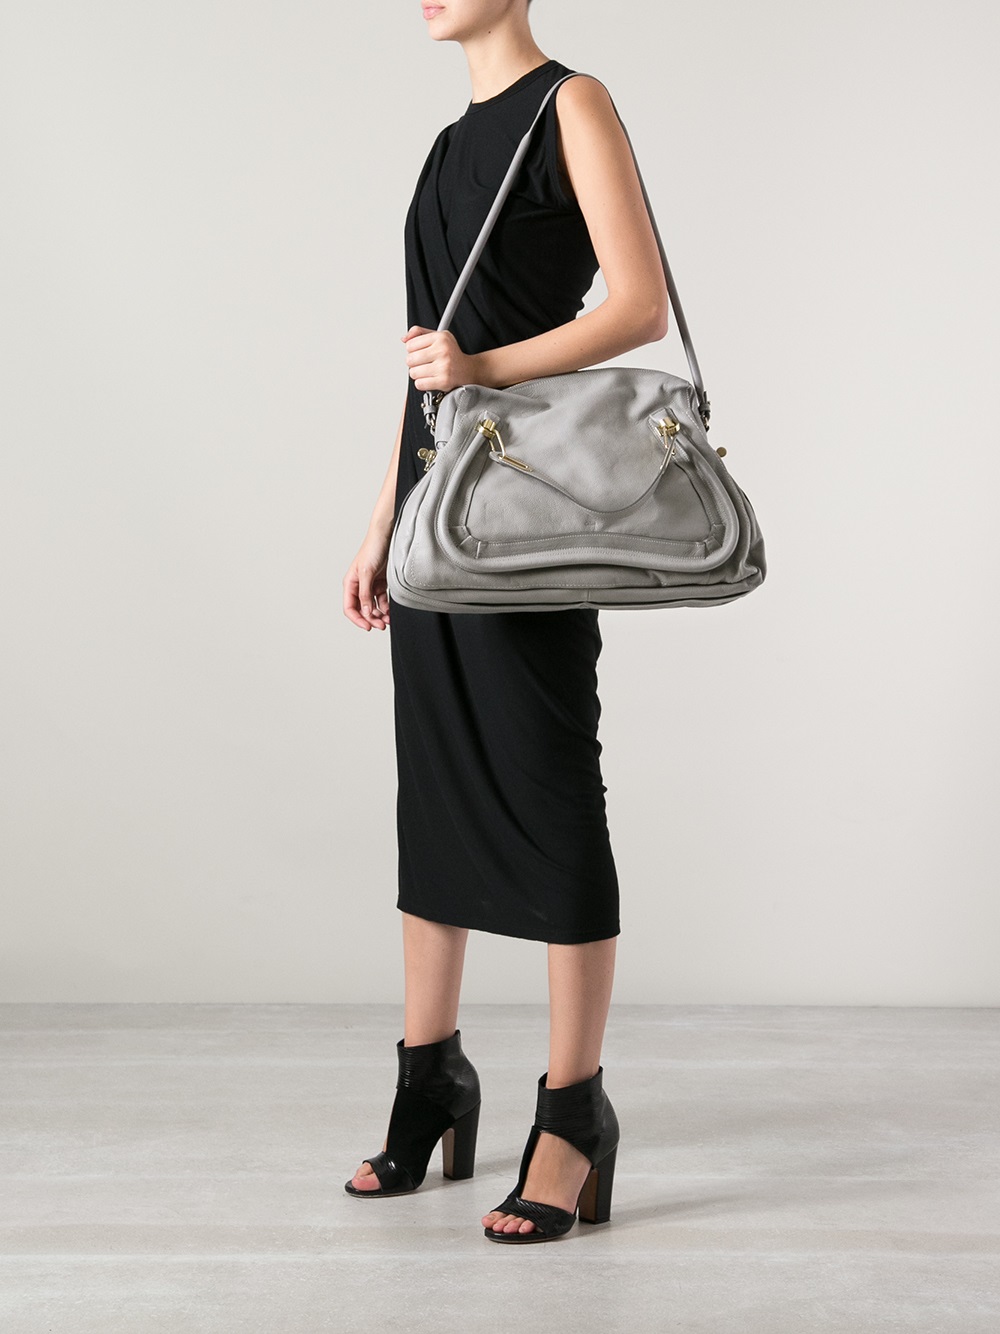 Chloé Paraty Tote Bag in Gray - Lyst